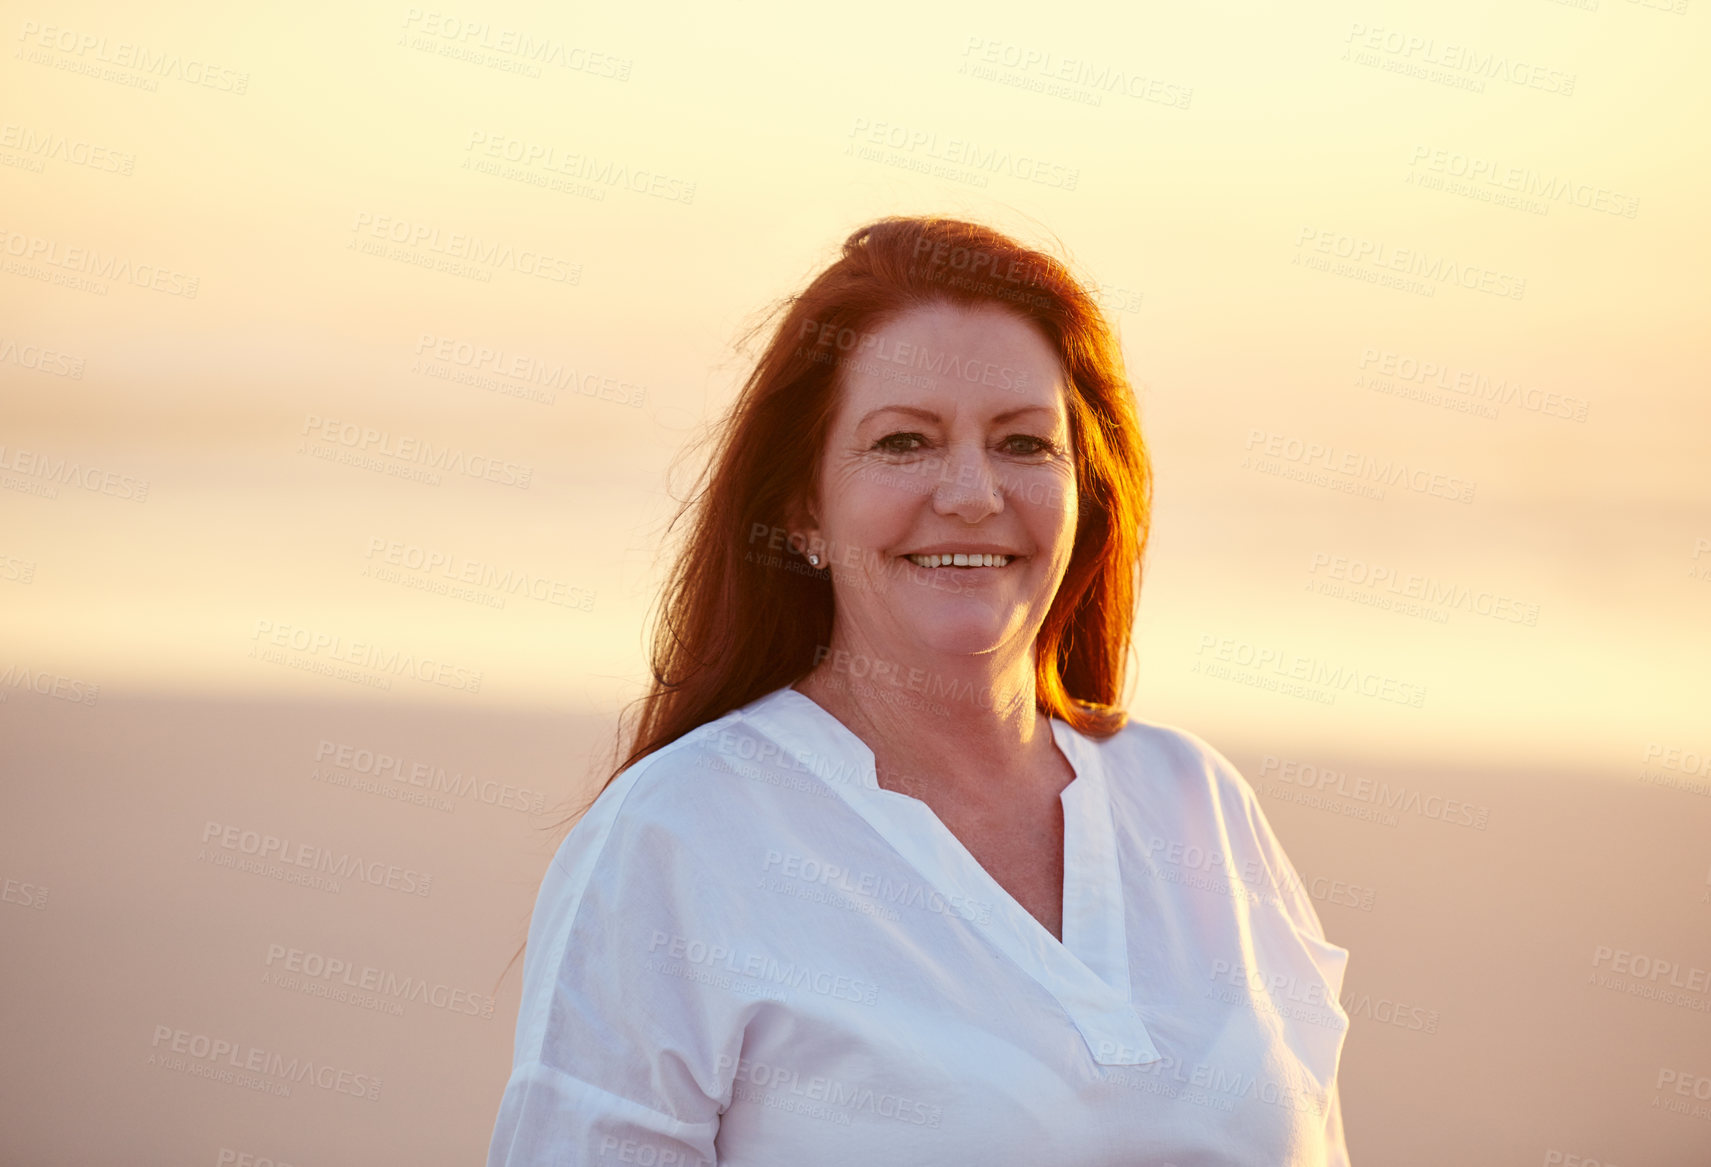 Buy stock photo Shot of mature woman standing on the beach at sunset